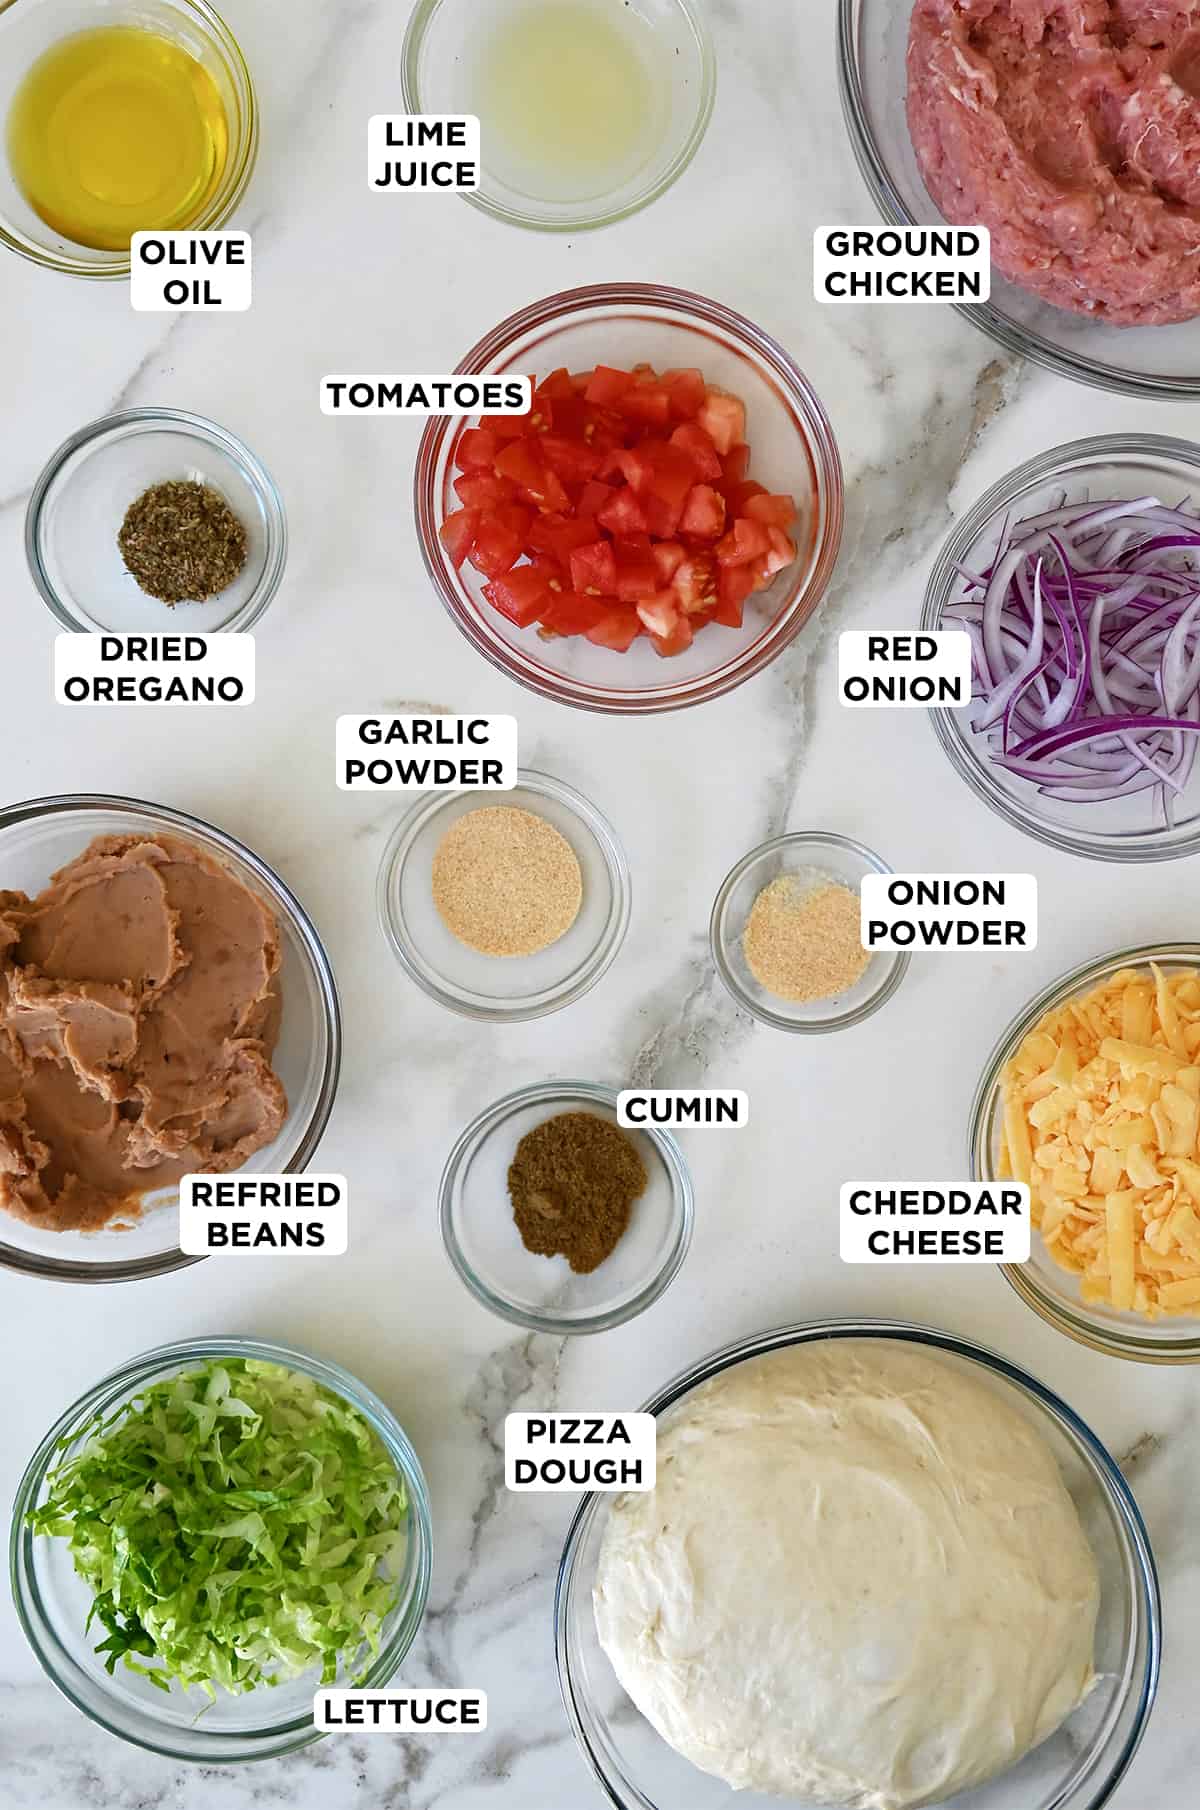 Various sizes of glass bowls containing ingredients for taco pizza, including pizza dough, shredded lettuce, refried beans, dried oregano, diced tomatoes, ground chicken, sliced red onion, onion powder, garlic powder, cumin, and shredded cheddar cheese.